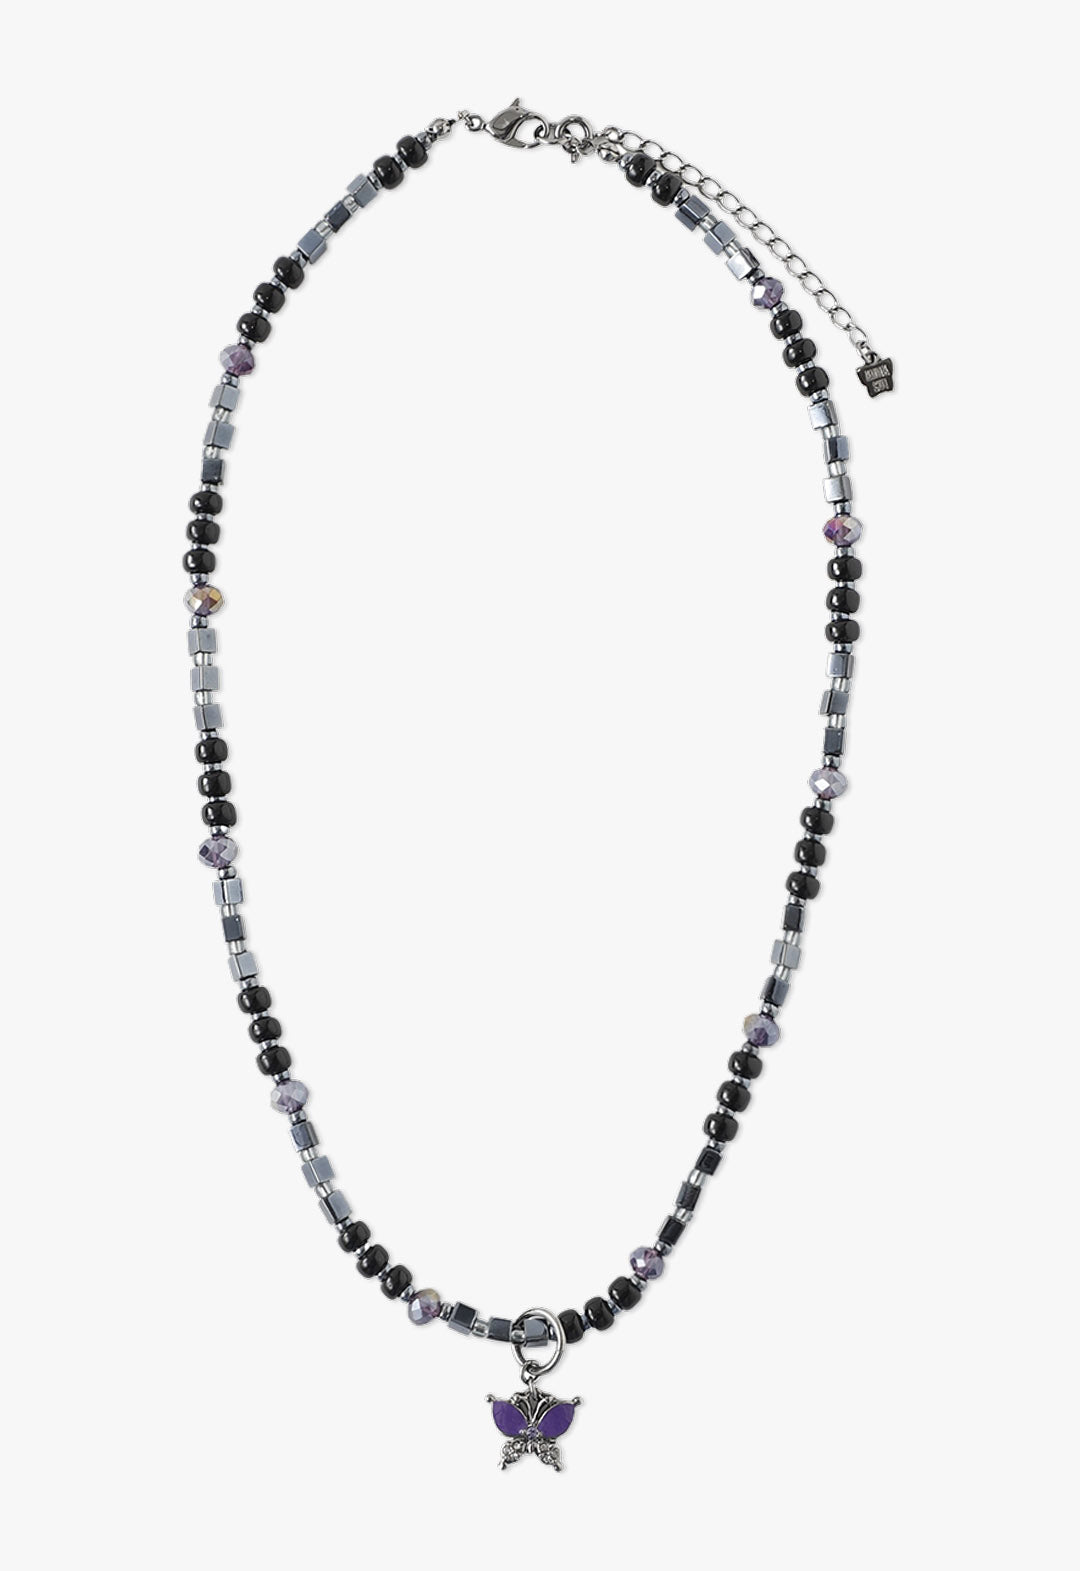 Purple Butterfly Stone Necklace, alternate beads chain, round black, silver cubes, multi facet balls